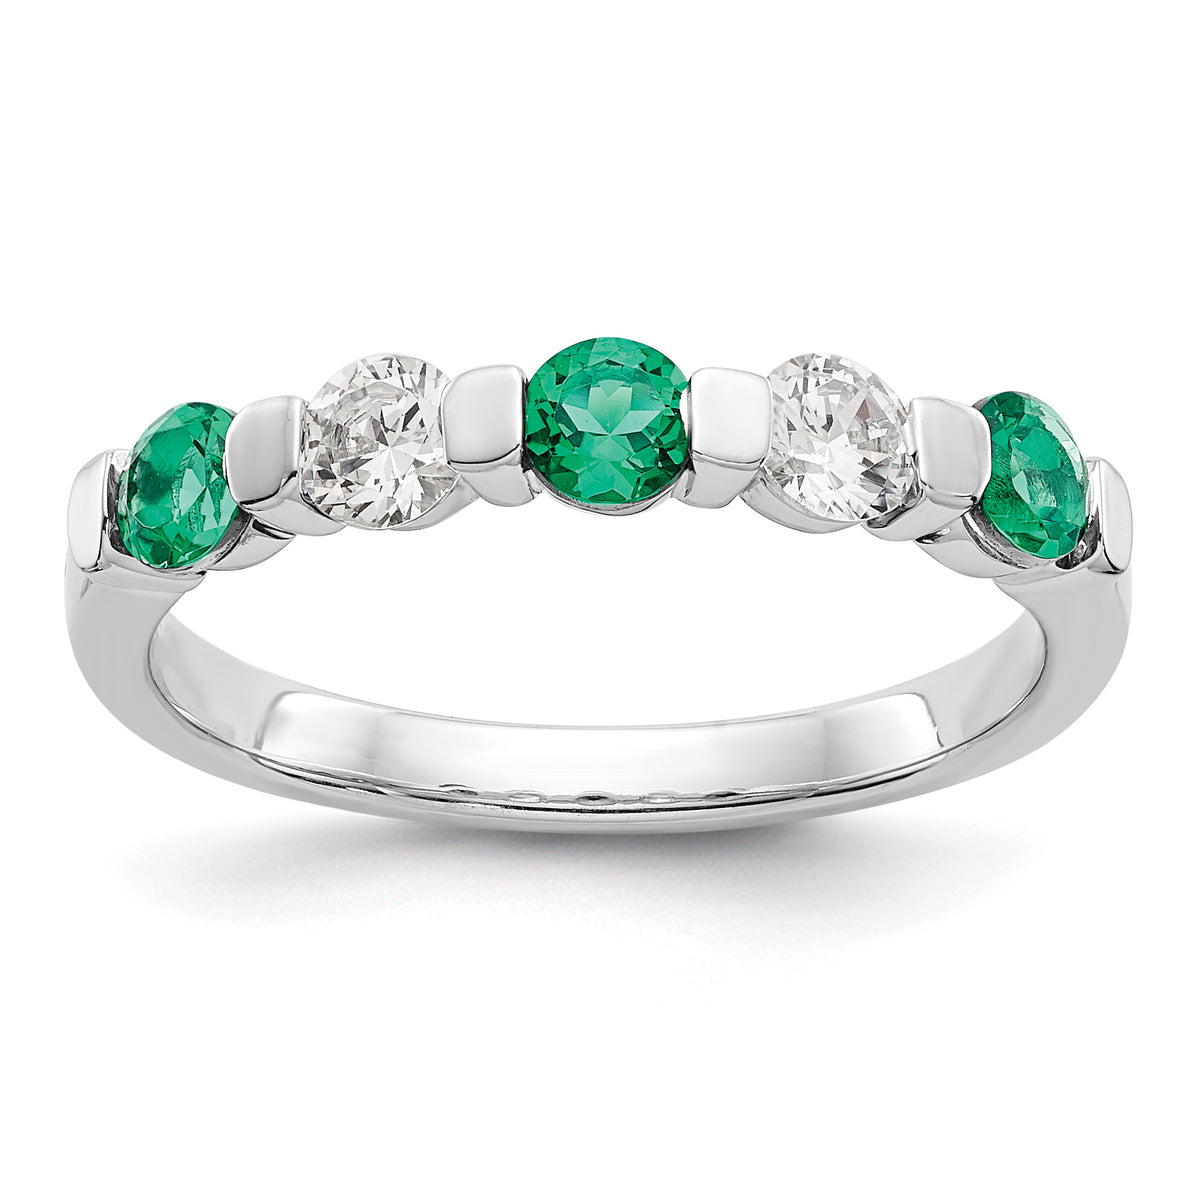 14K White Gold 1/3 carat Diamond and Emerald Complete Band